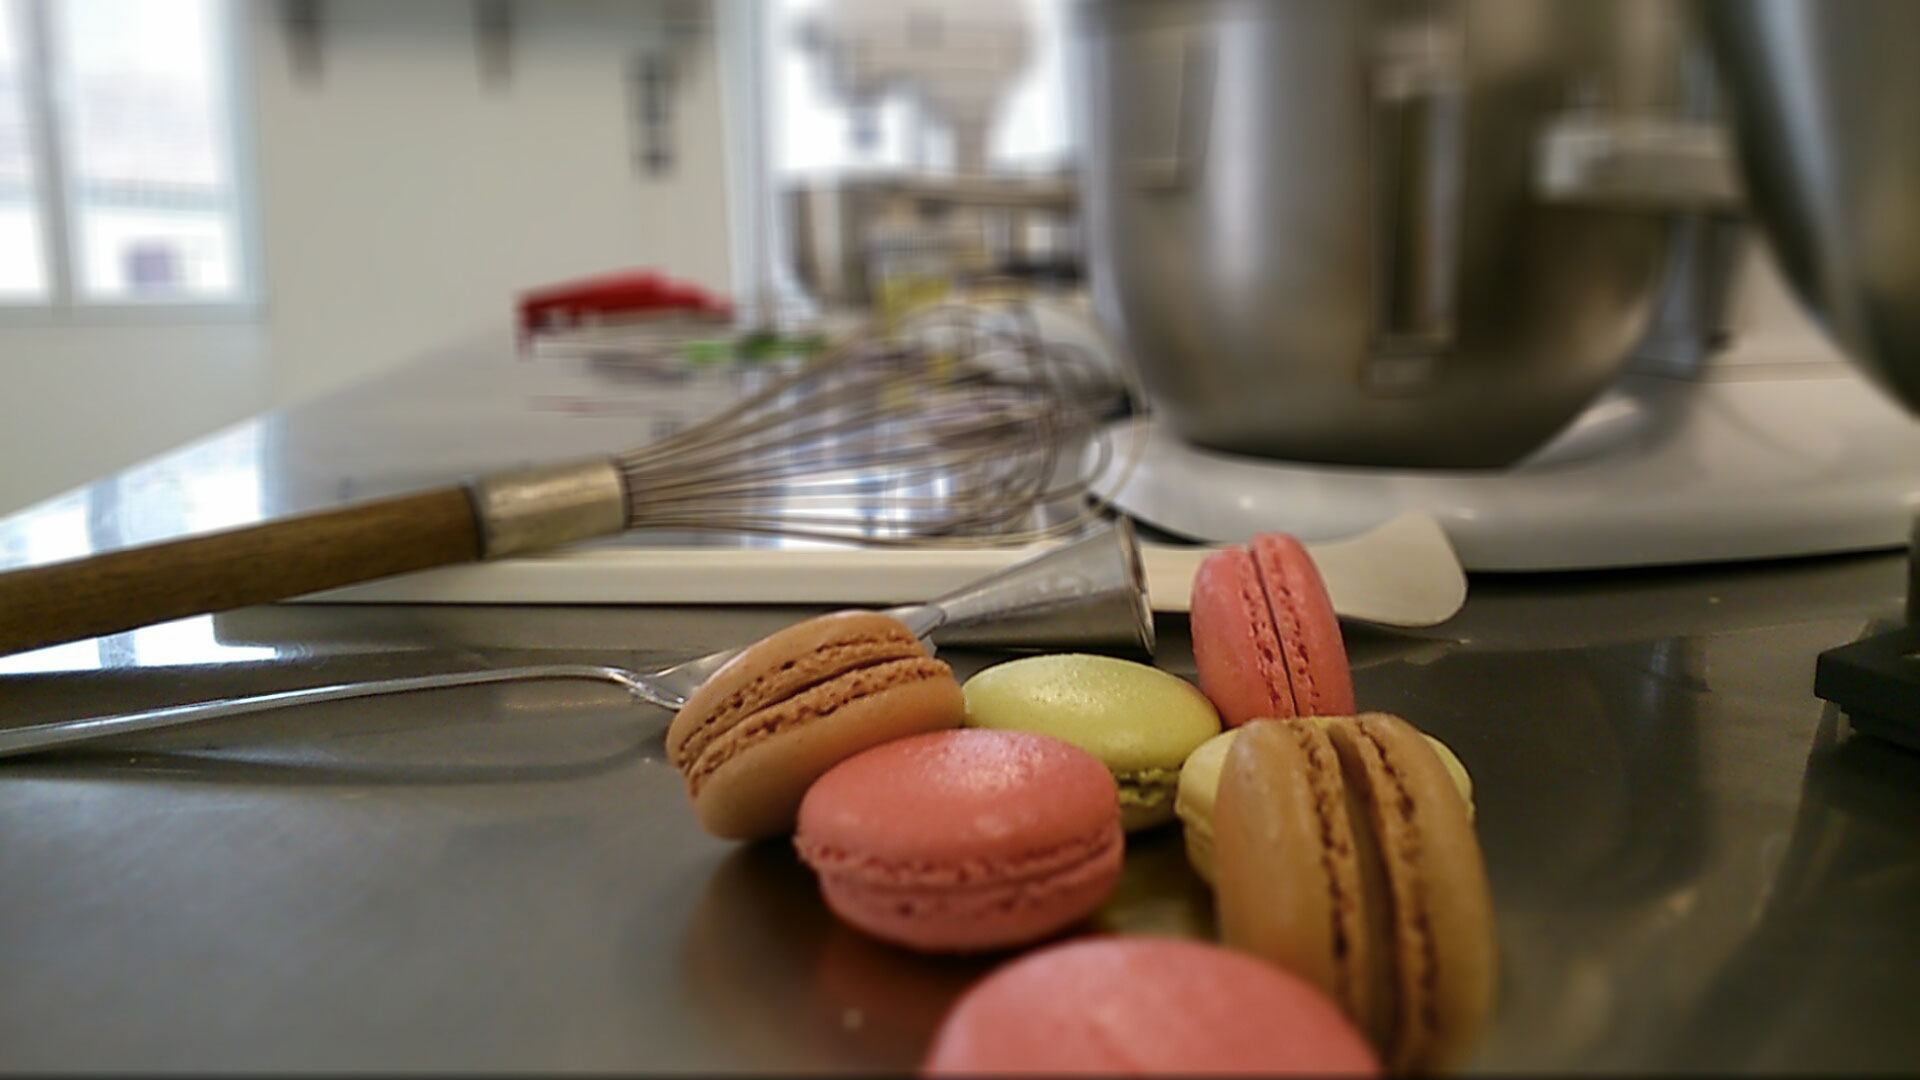 Hamac & Macarons - Pastry courses